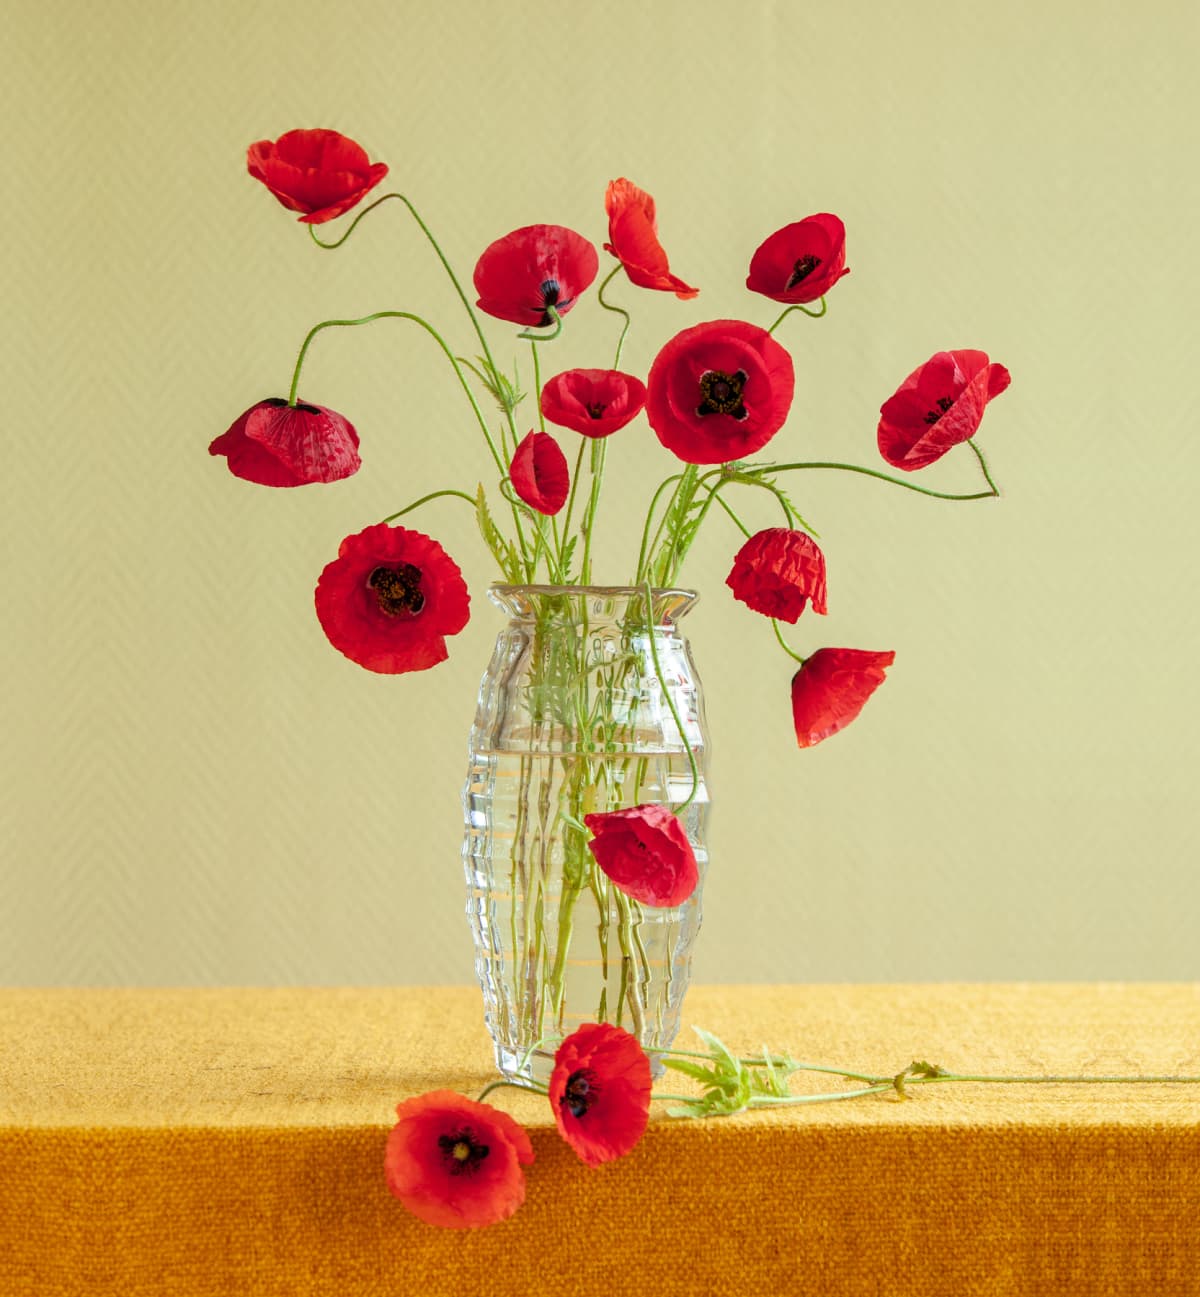 Glass vase holding a bouquet of poppy flowers